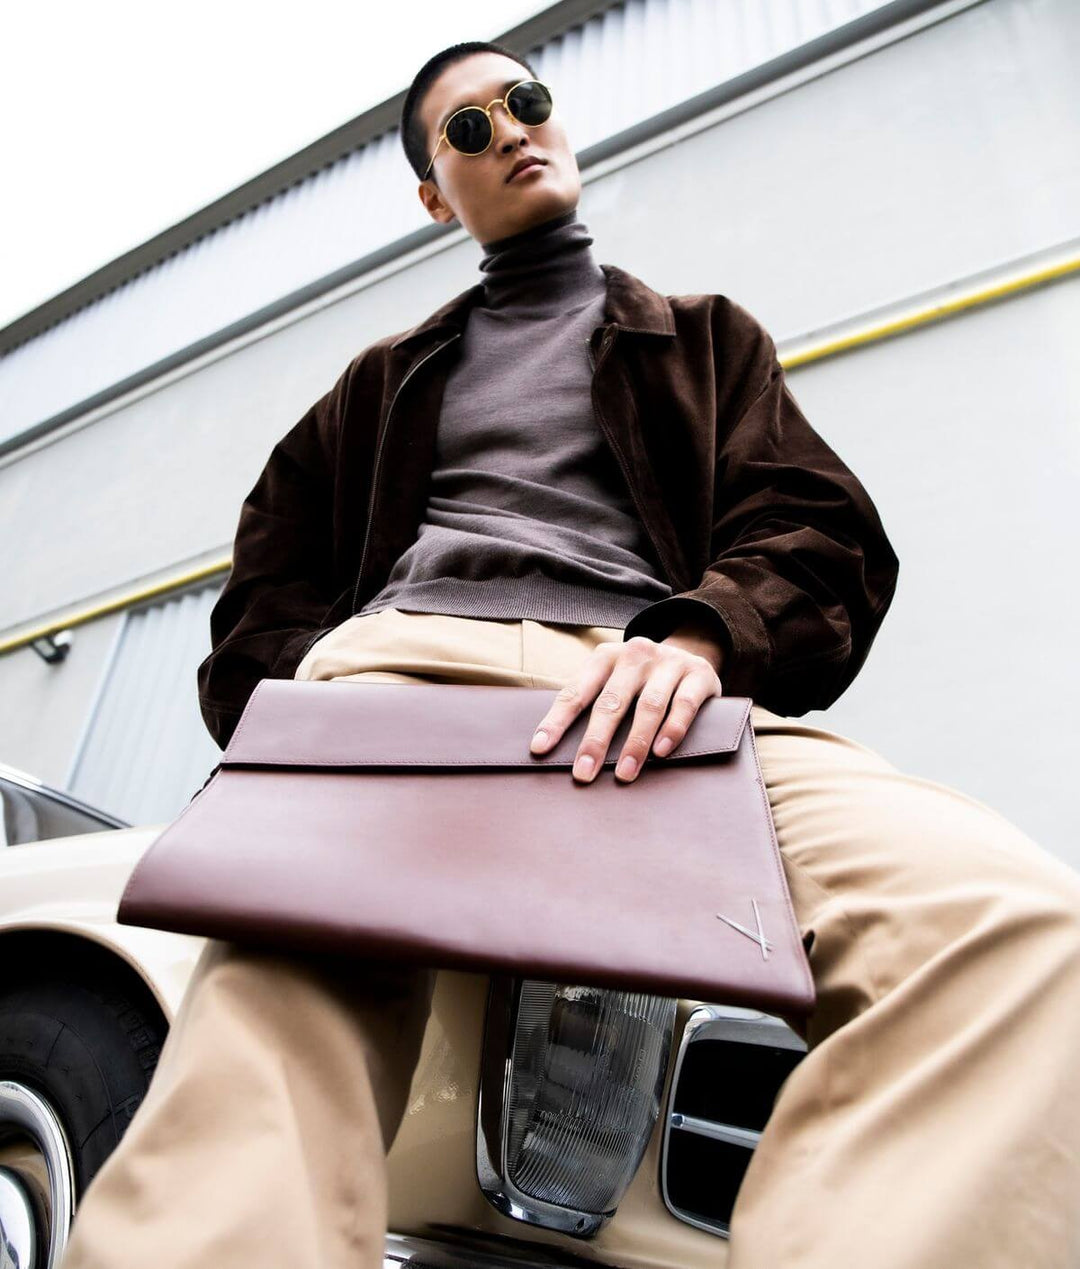 Fashionable person holding a leather portfolio case, wearing sunglasses, standing in front of a vintage car